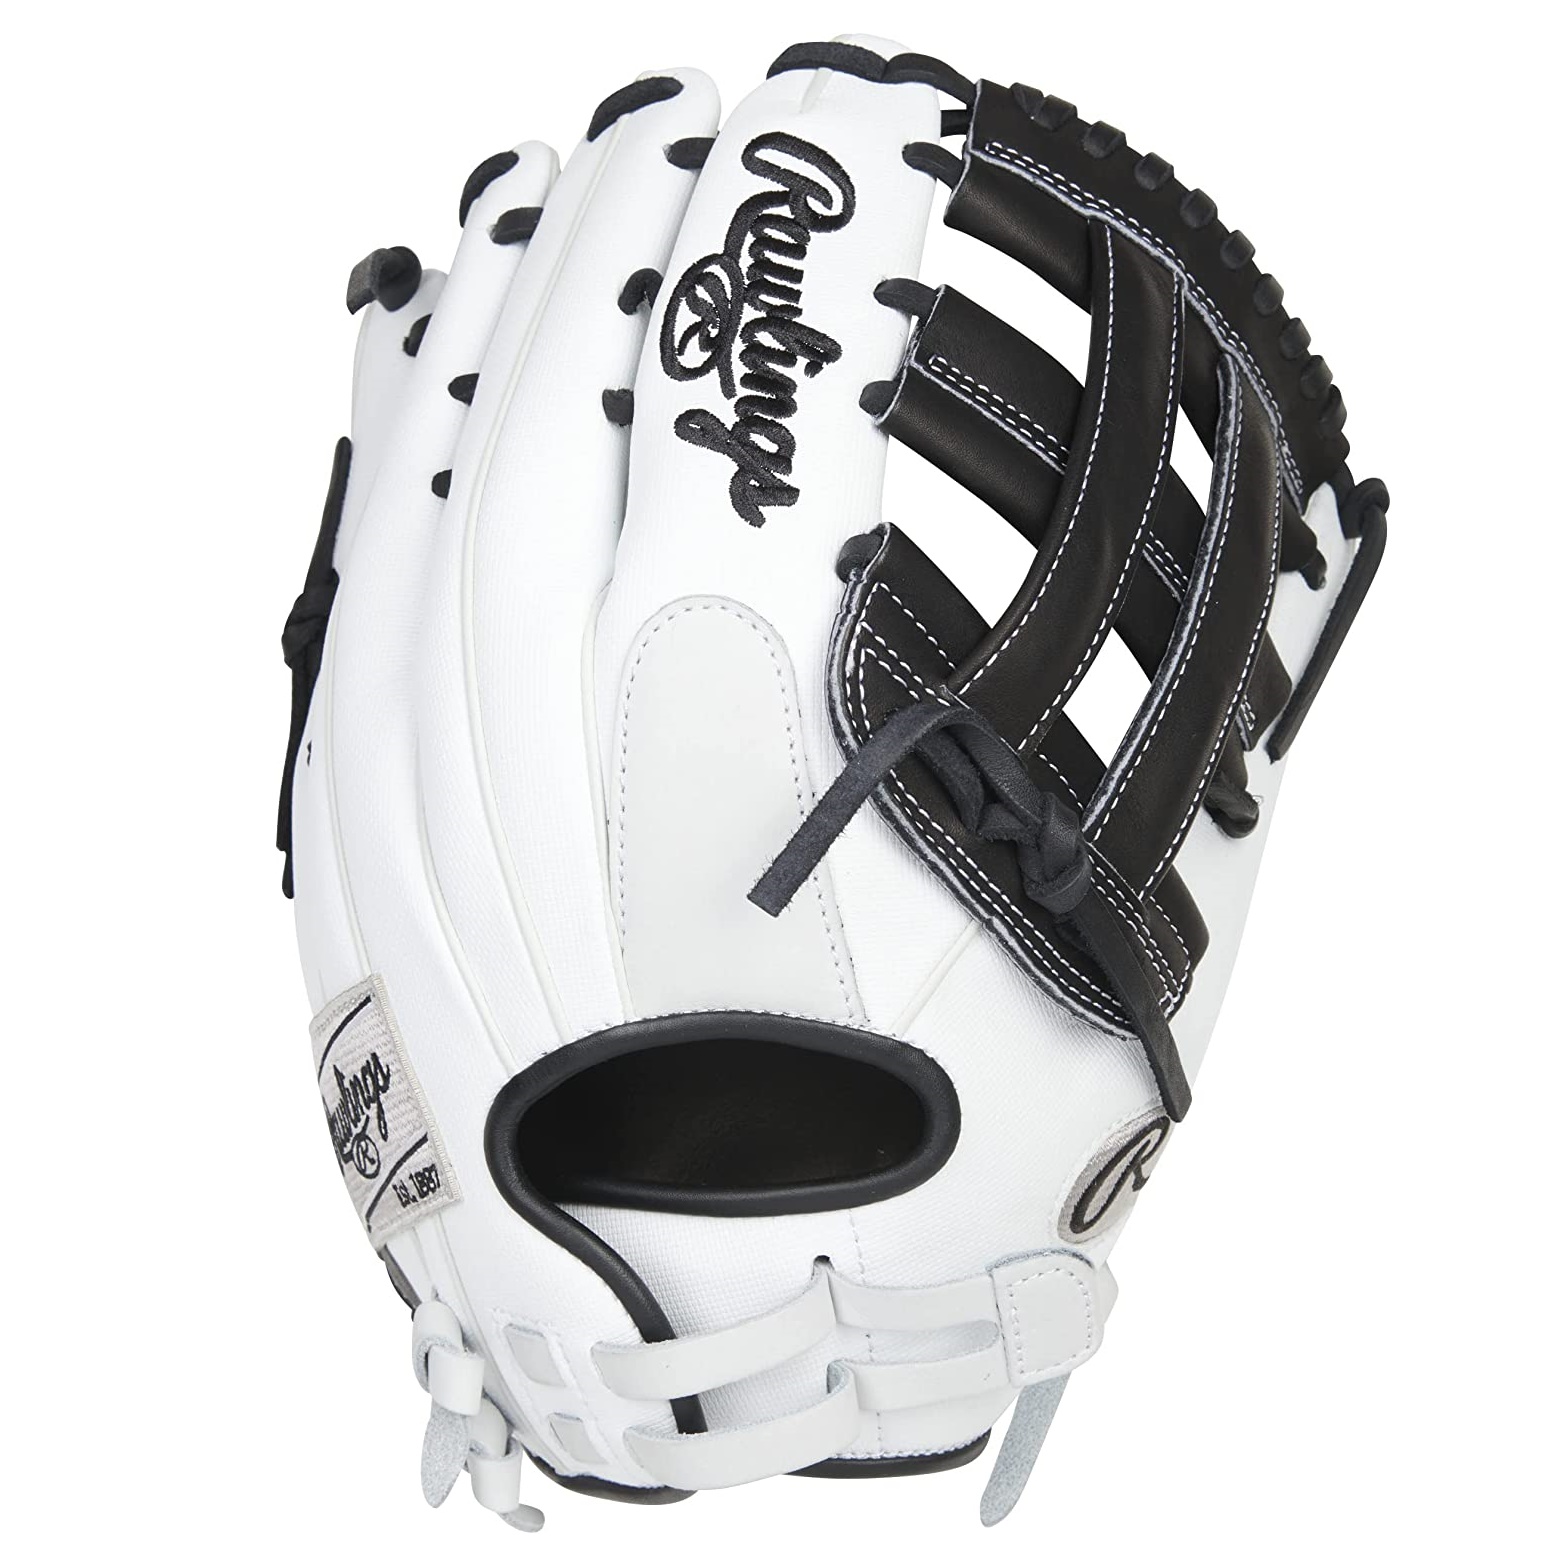 rawlings-heart-of-the-hide-softball-glove-12-75-white-black-right-hand-throw PRO1275SB-6BSS-RightHandThrow Rawlings  Unmatched performance comfort and durability come together with this Rawlings Heart